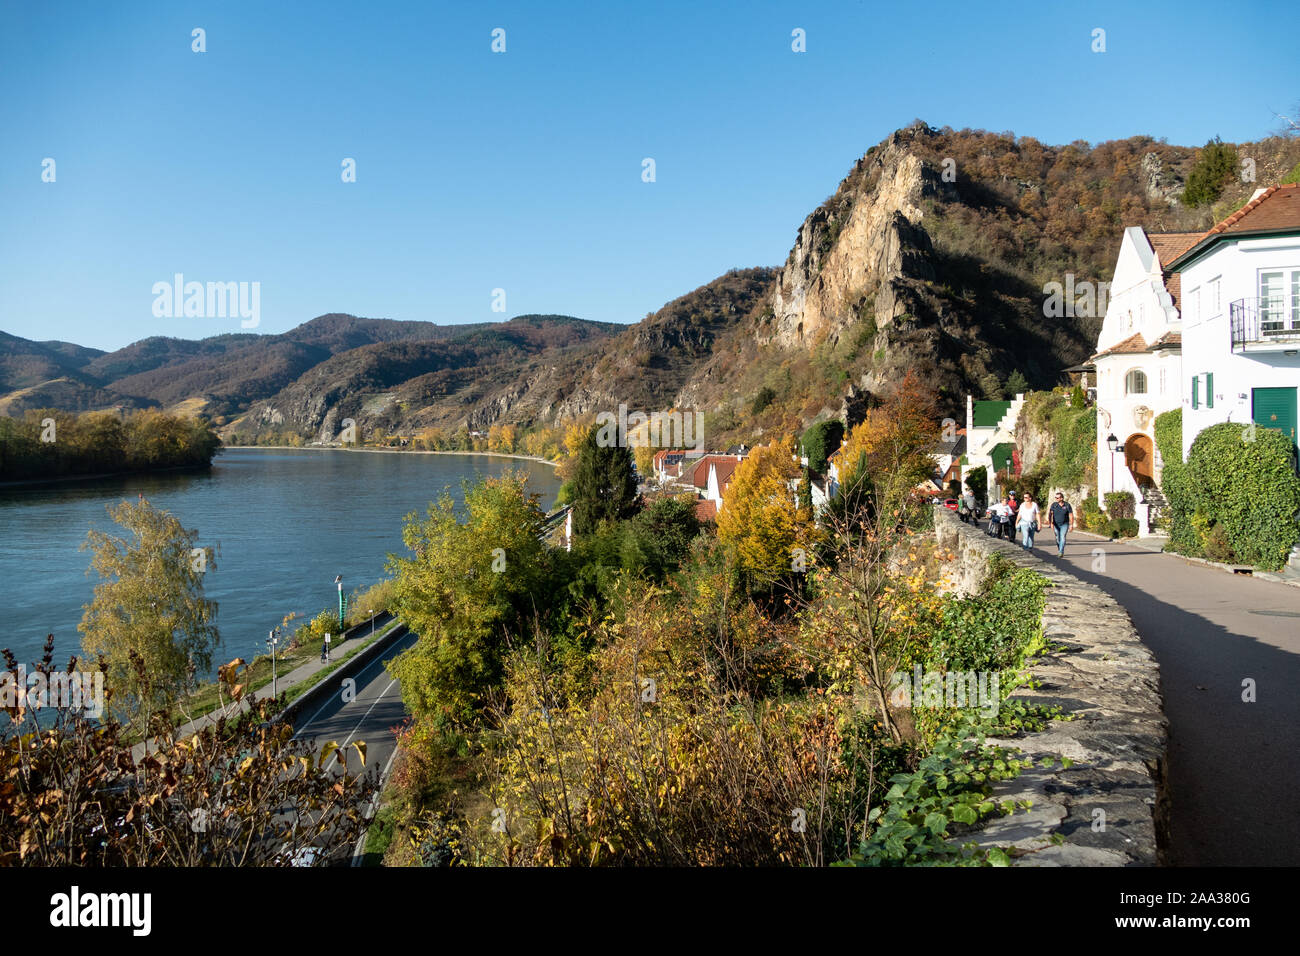 People walking along the mountain road to the modern part of Durnstein, alongside the river Danube Stock Photo